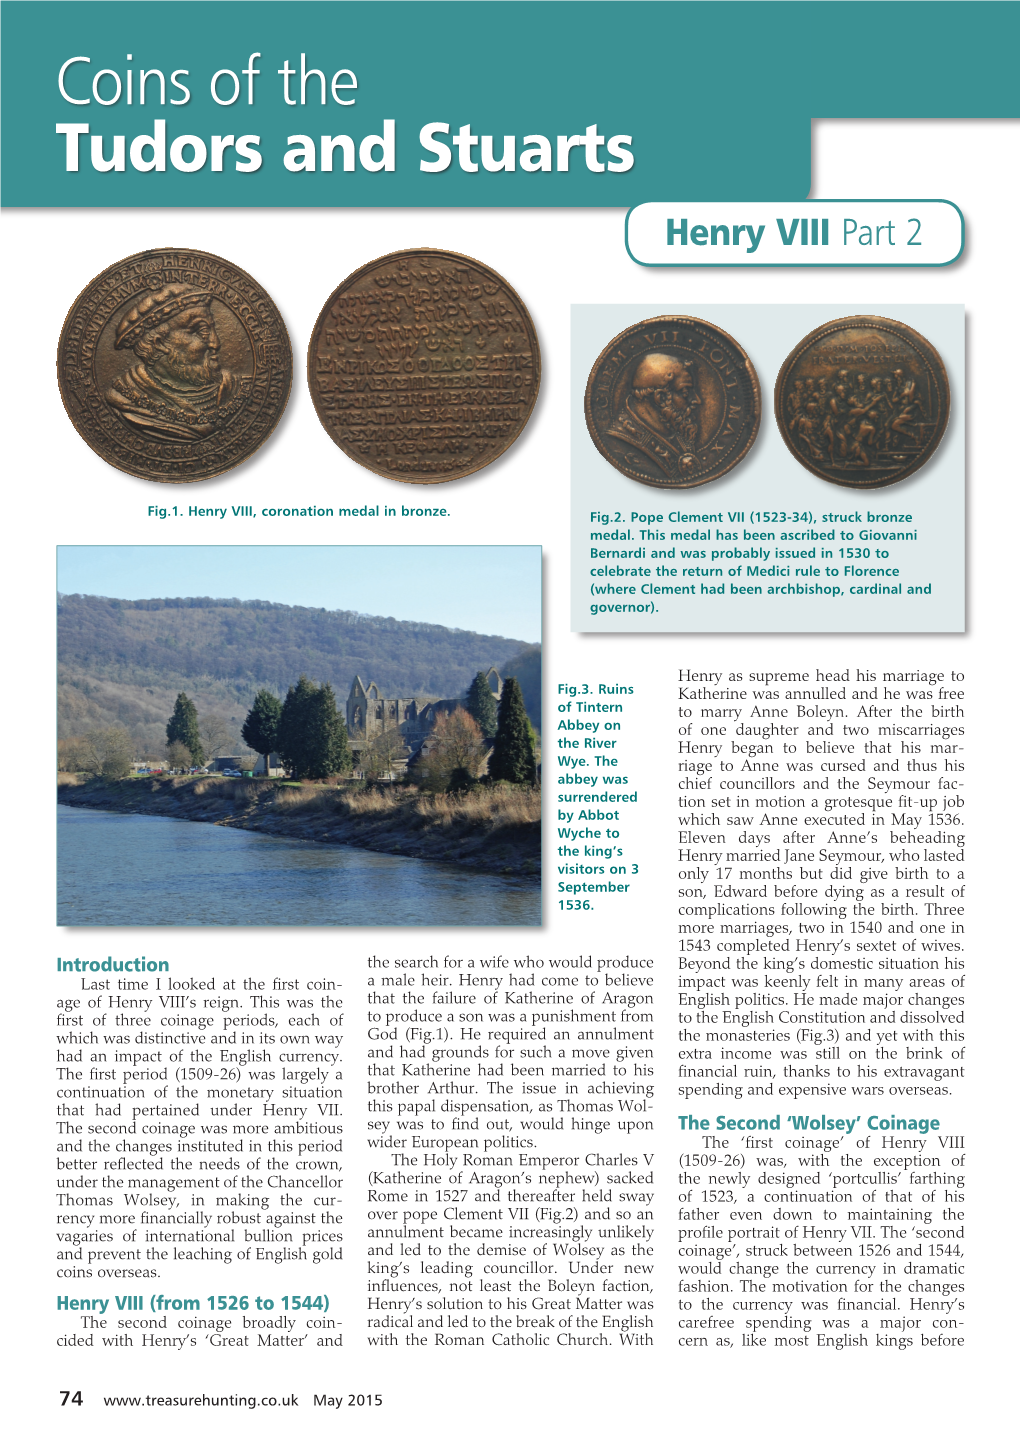 Coins of the Tudors and Stuarts Henry VIII Part 2